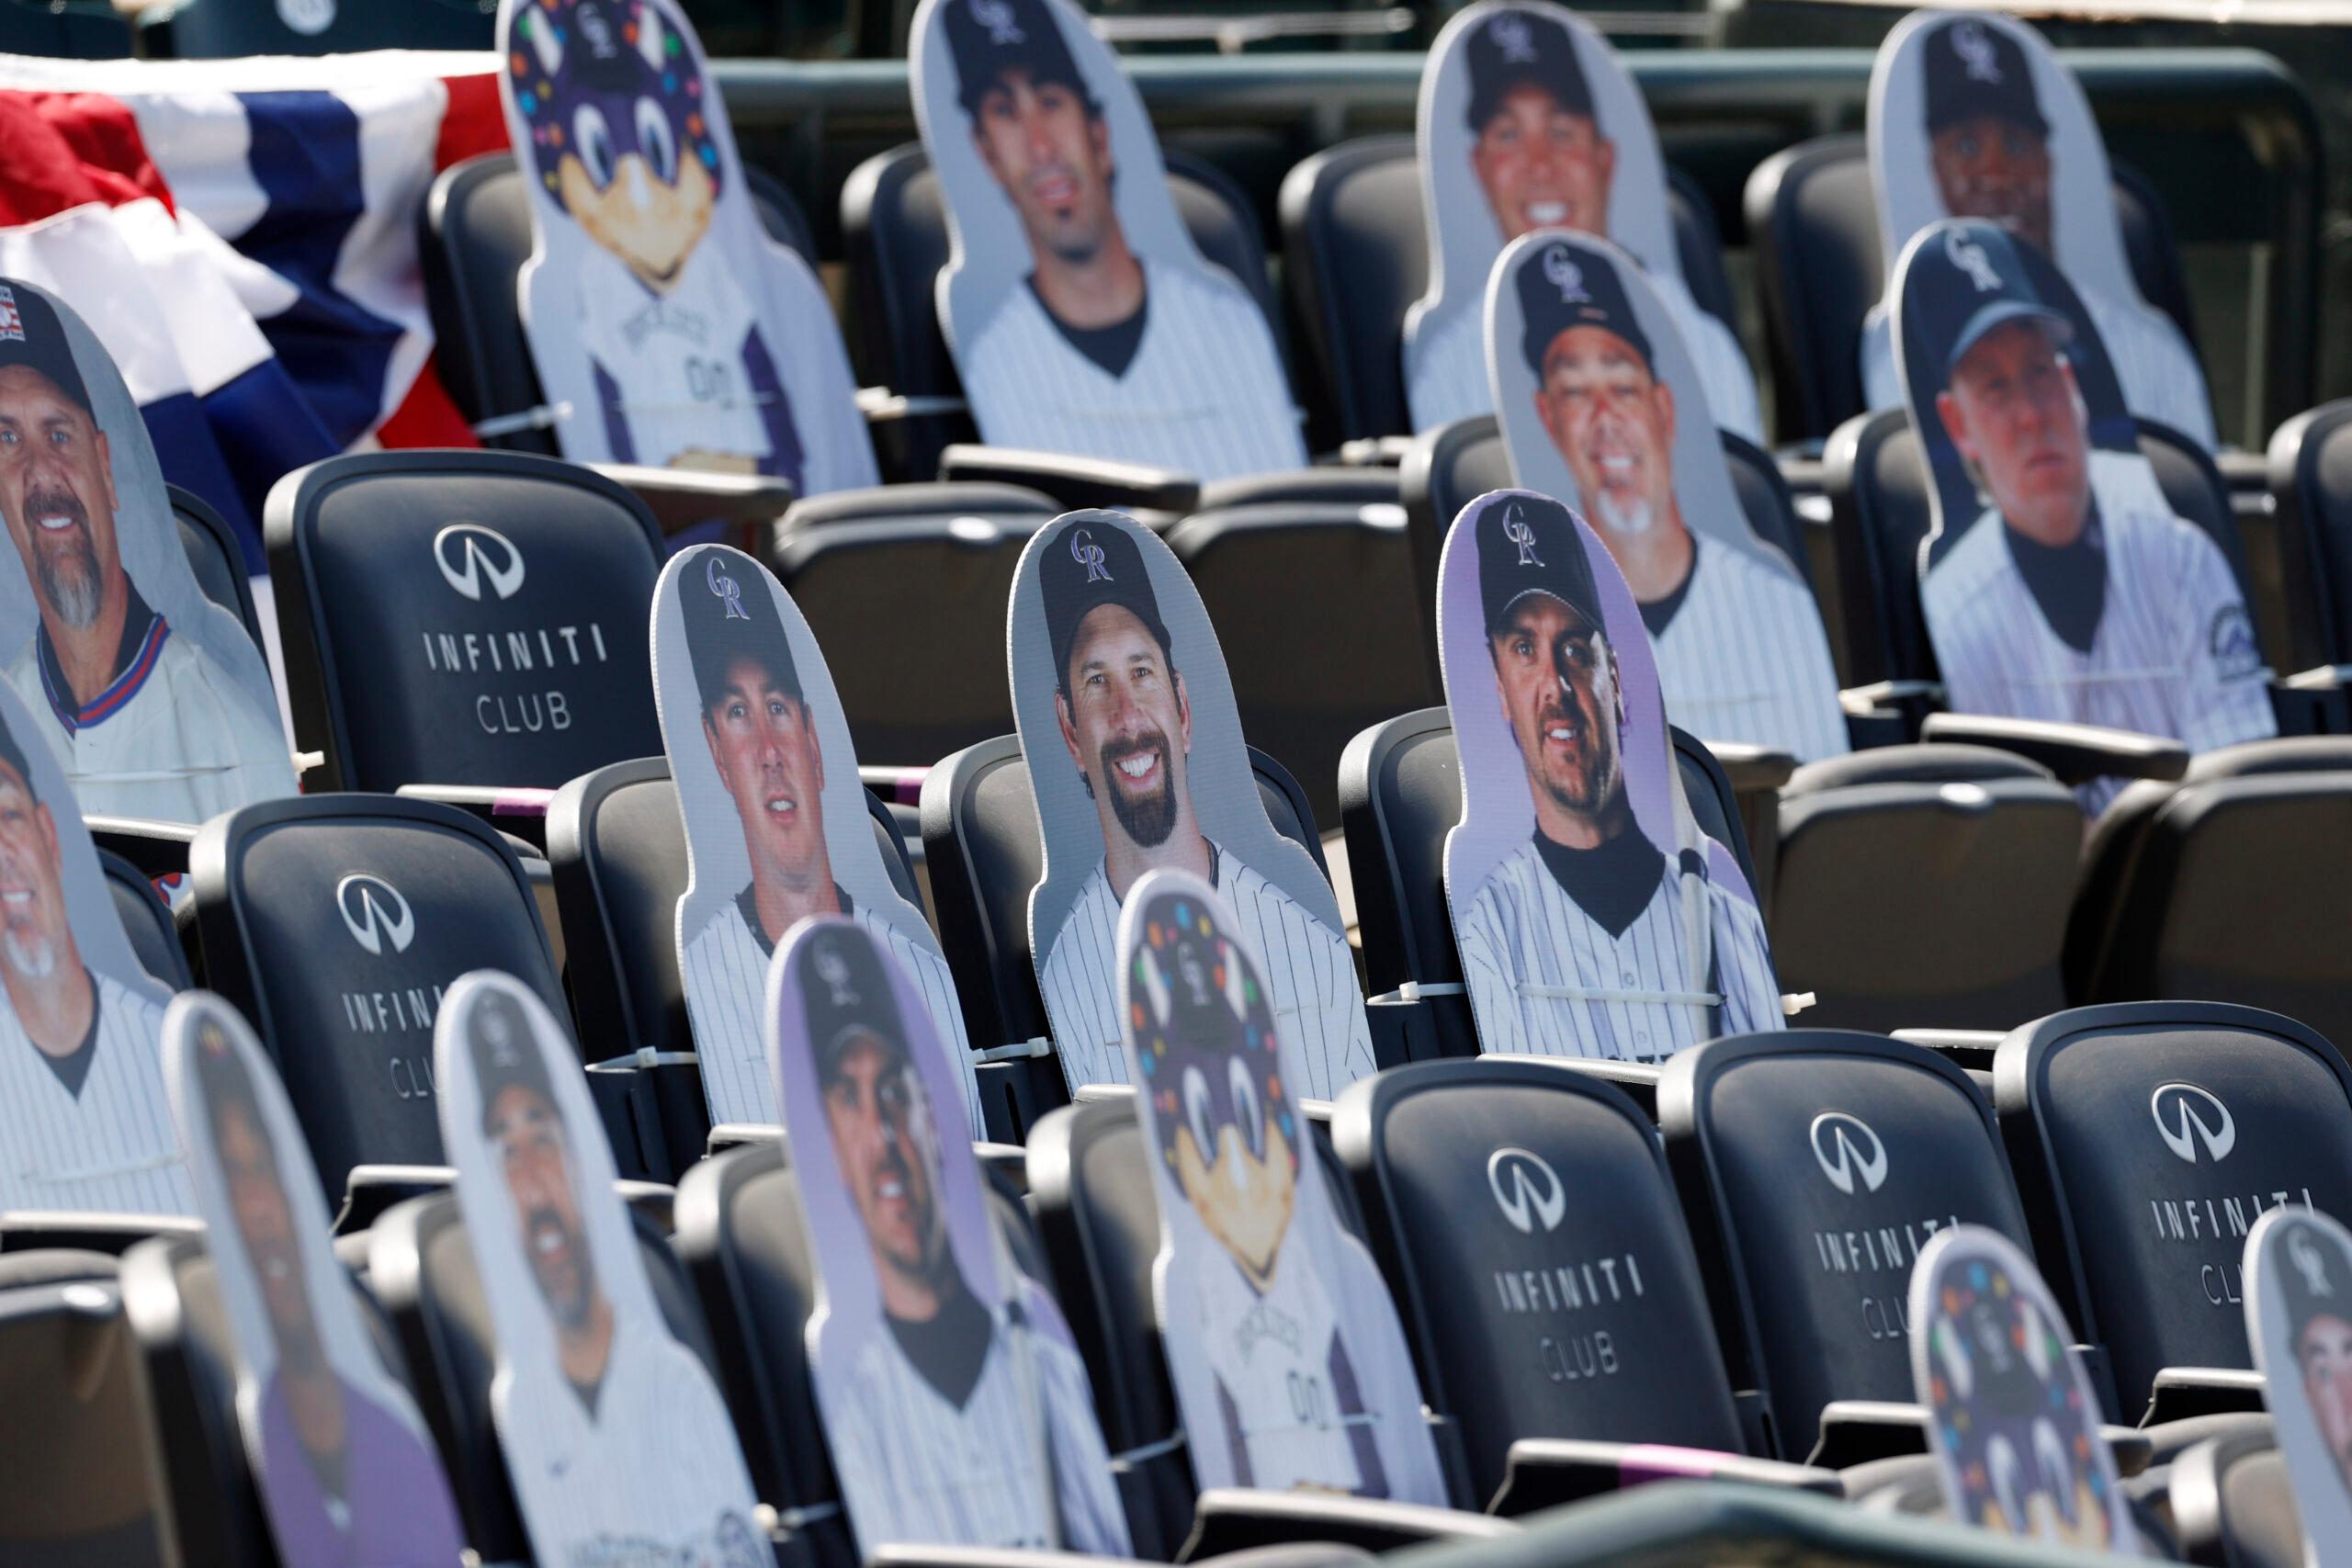 Empty seats Rockies opening day game 2020 cardboard cutouts